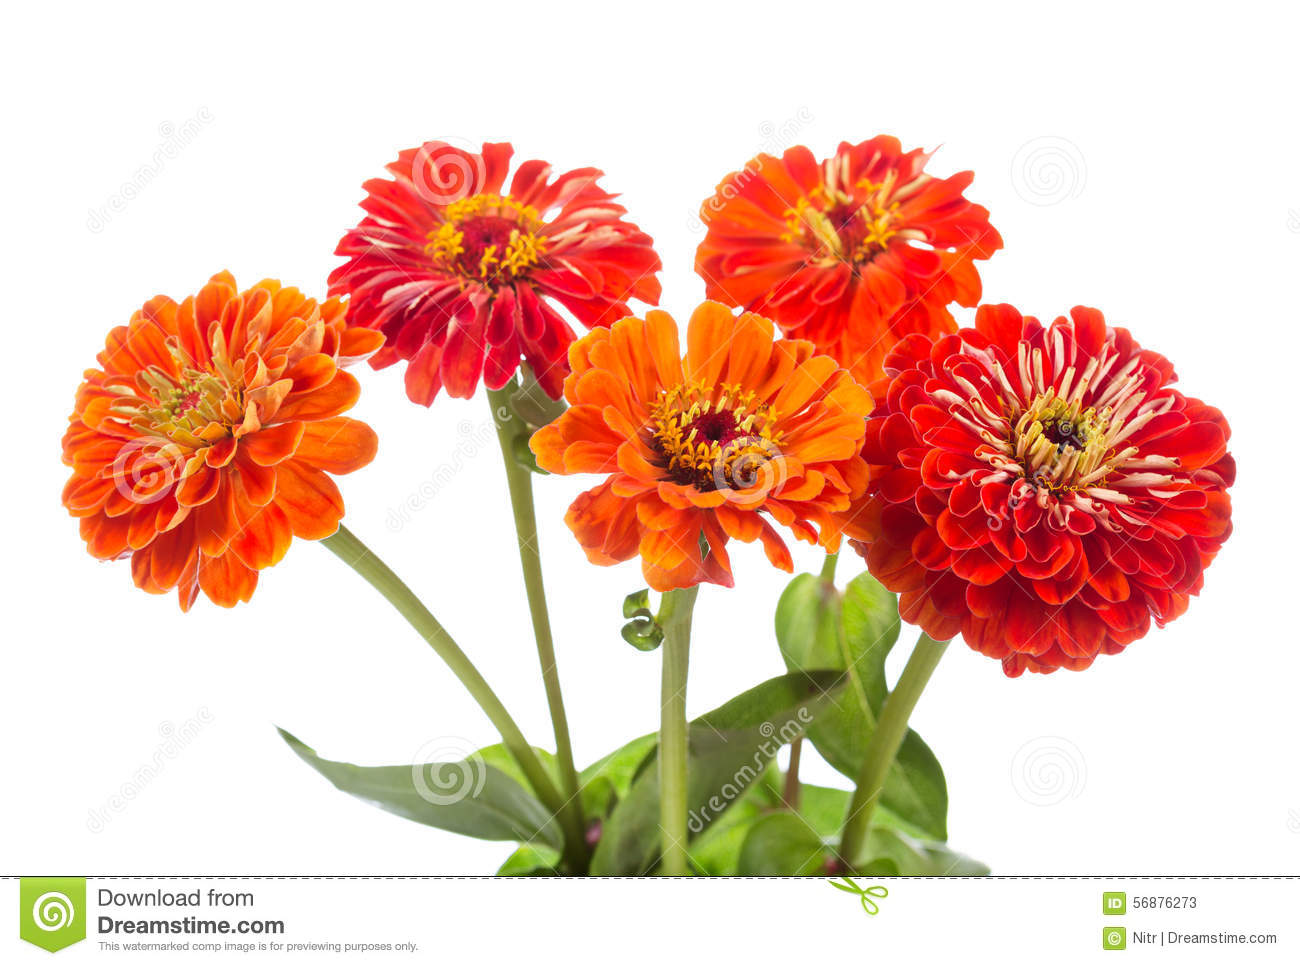 Zinnia clipart #15, Download drawings